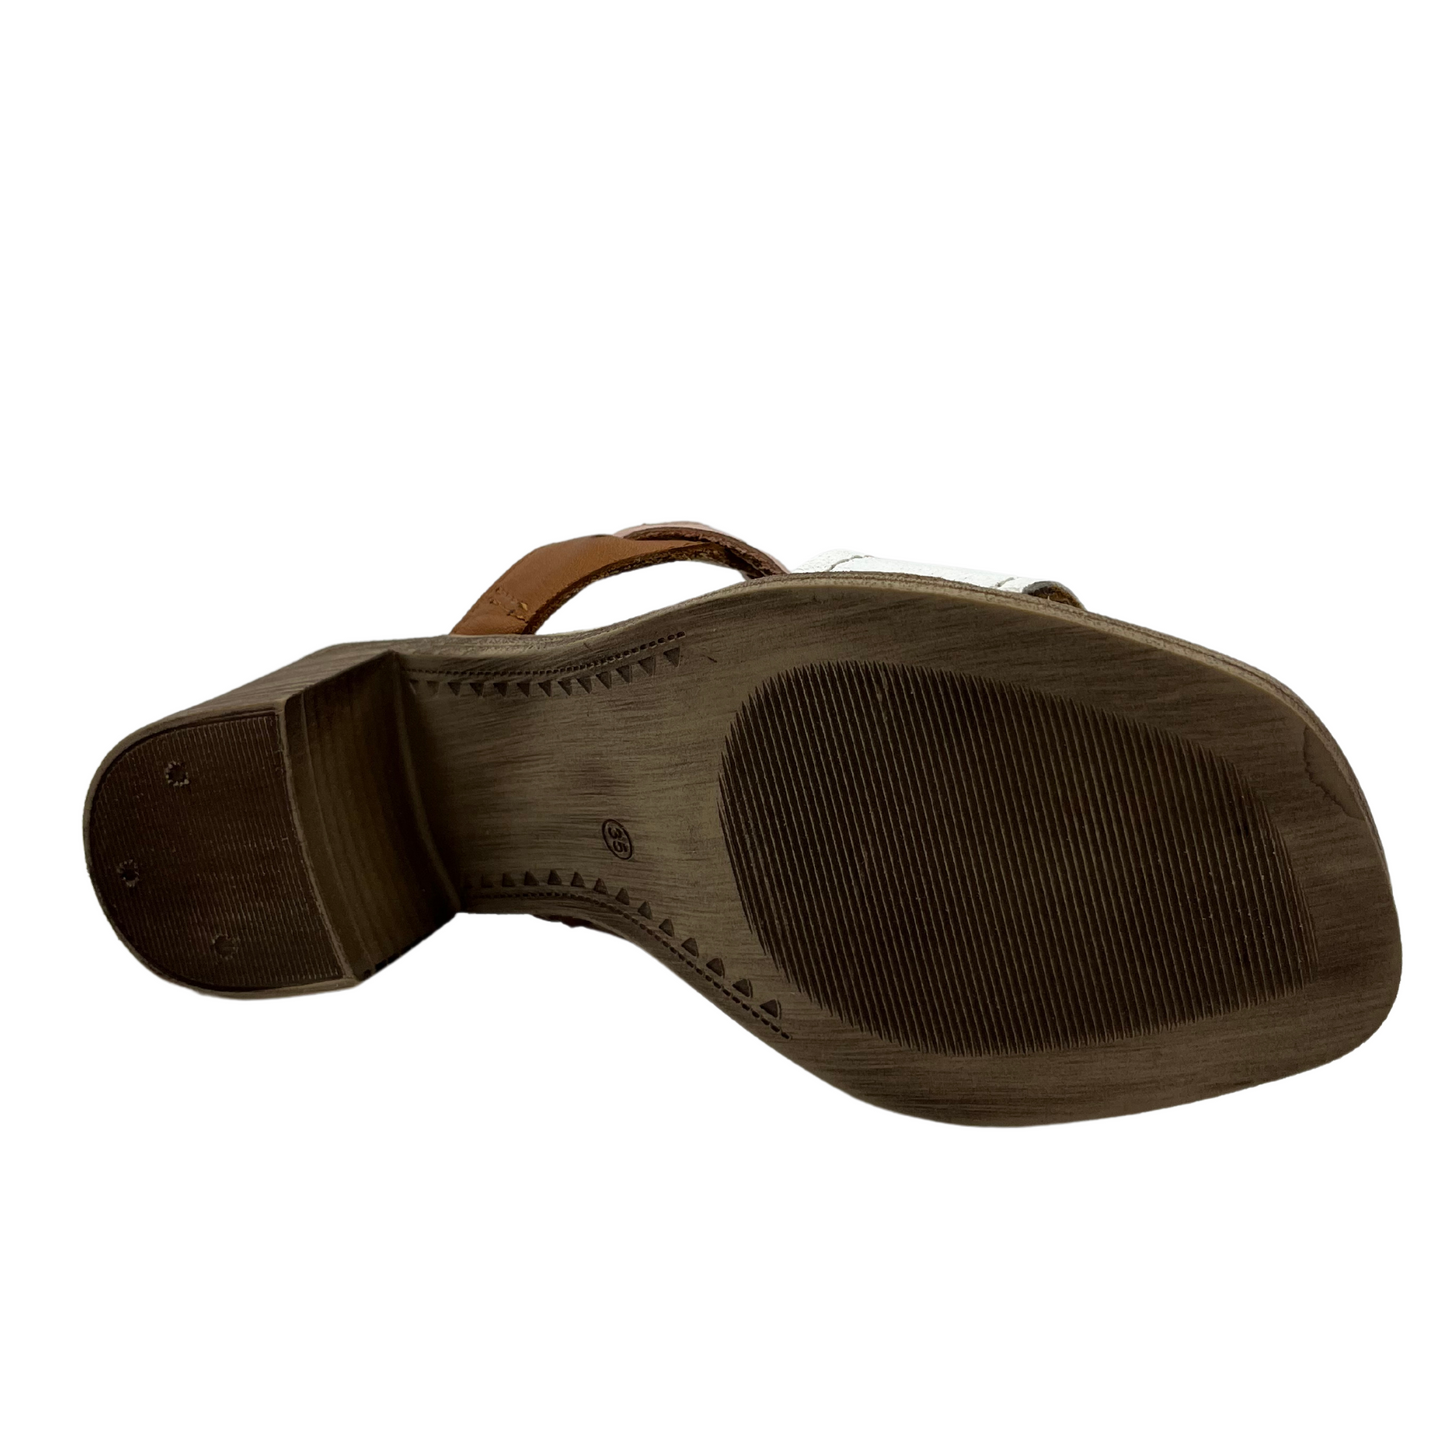 Bottom view of leather sandal with square toe, white toe strap and brown upper strap and short block heel